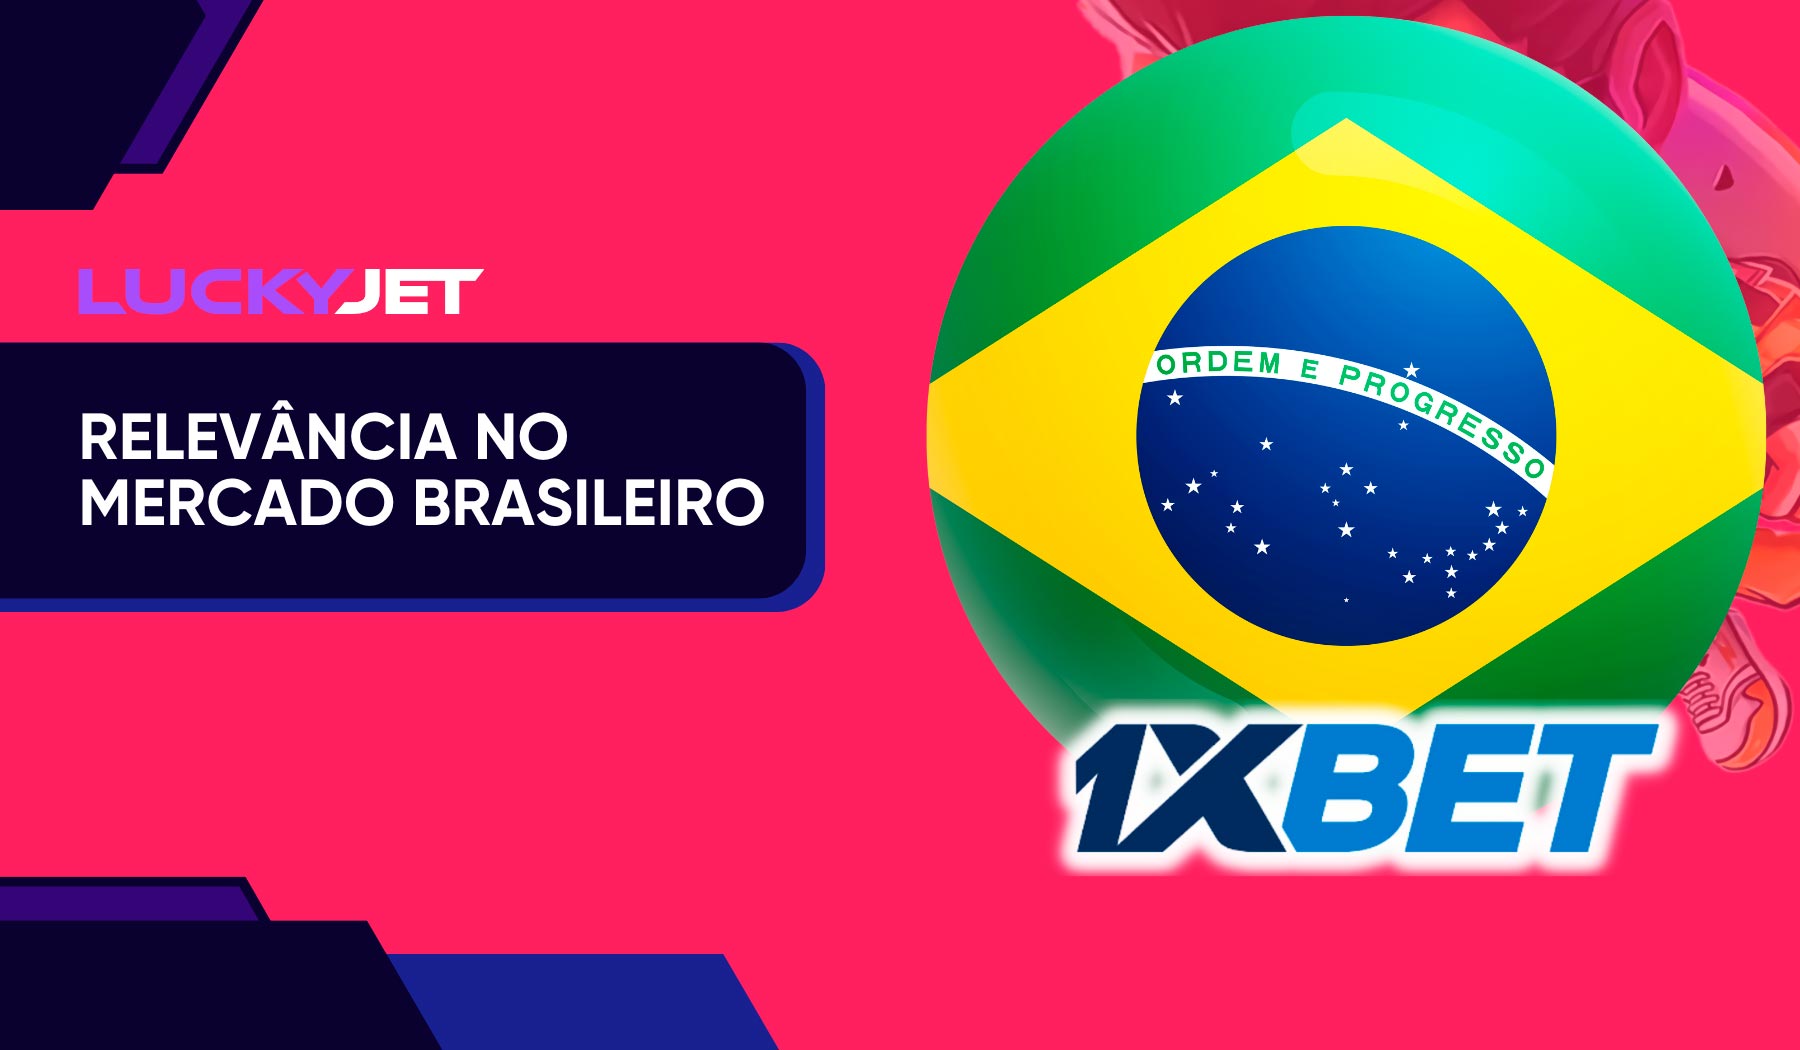 1xbet launched the Lucky Jet game specifically for the Brazilian market